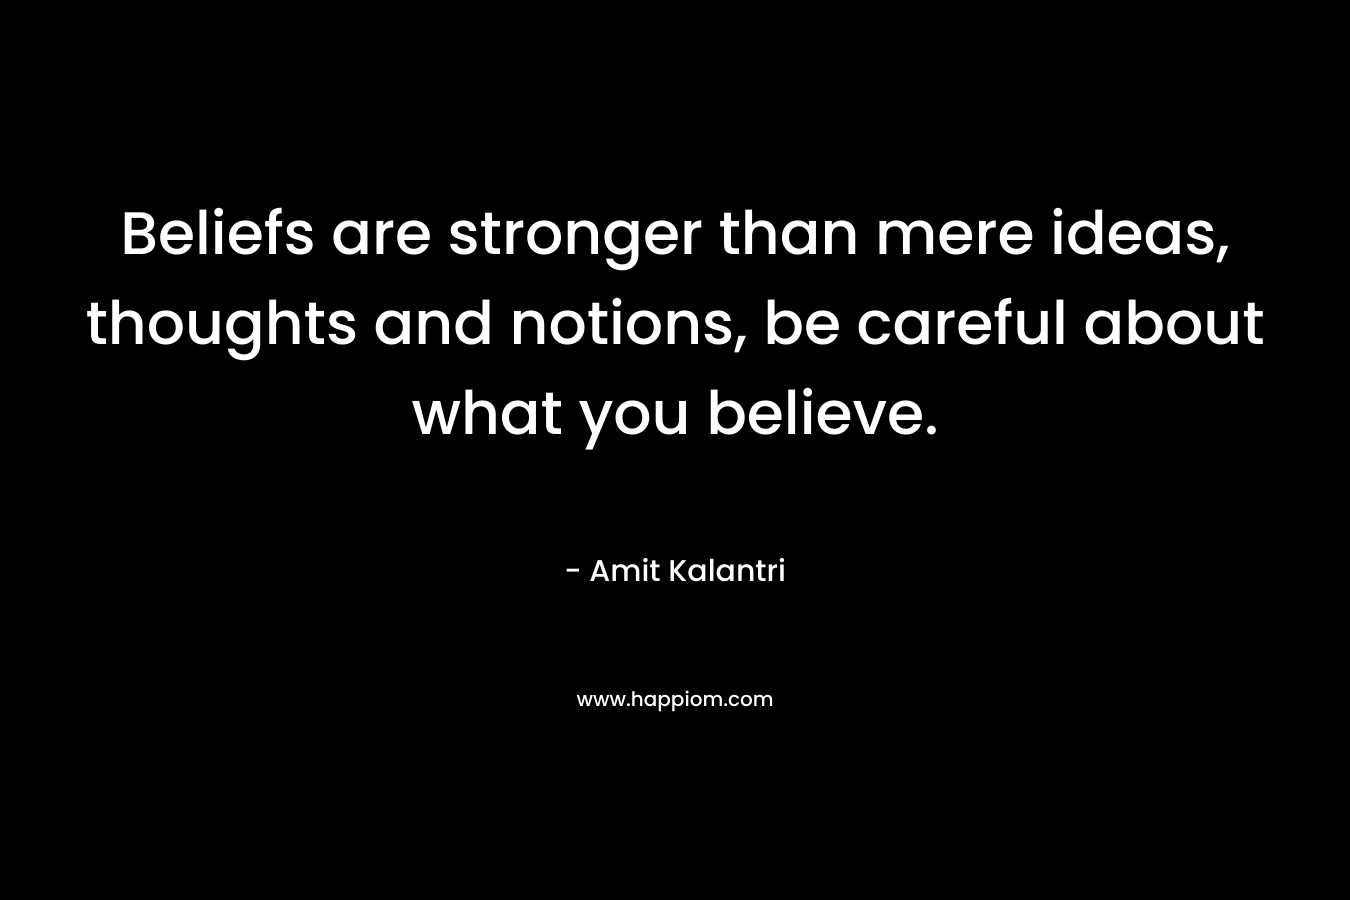 Beliefs are stronger than mere ideas, thoughts and notions, be careful about what you believe. – Amit Kalantri